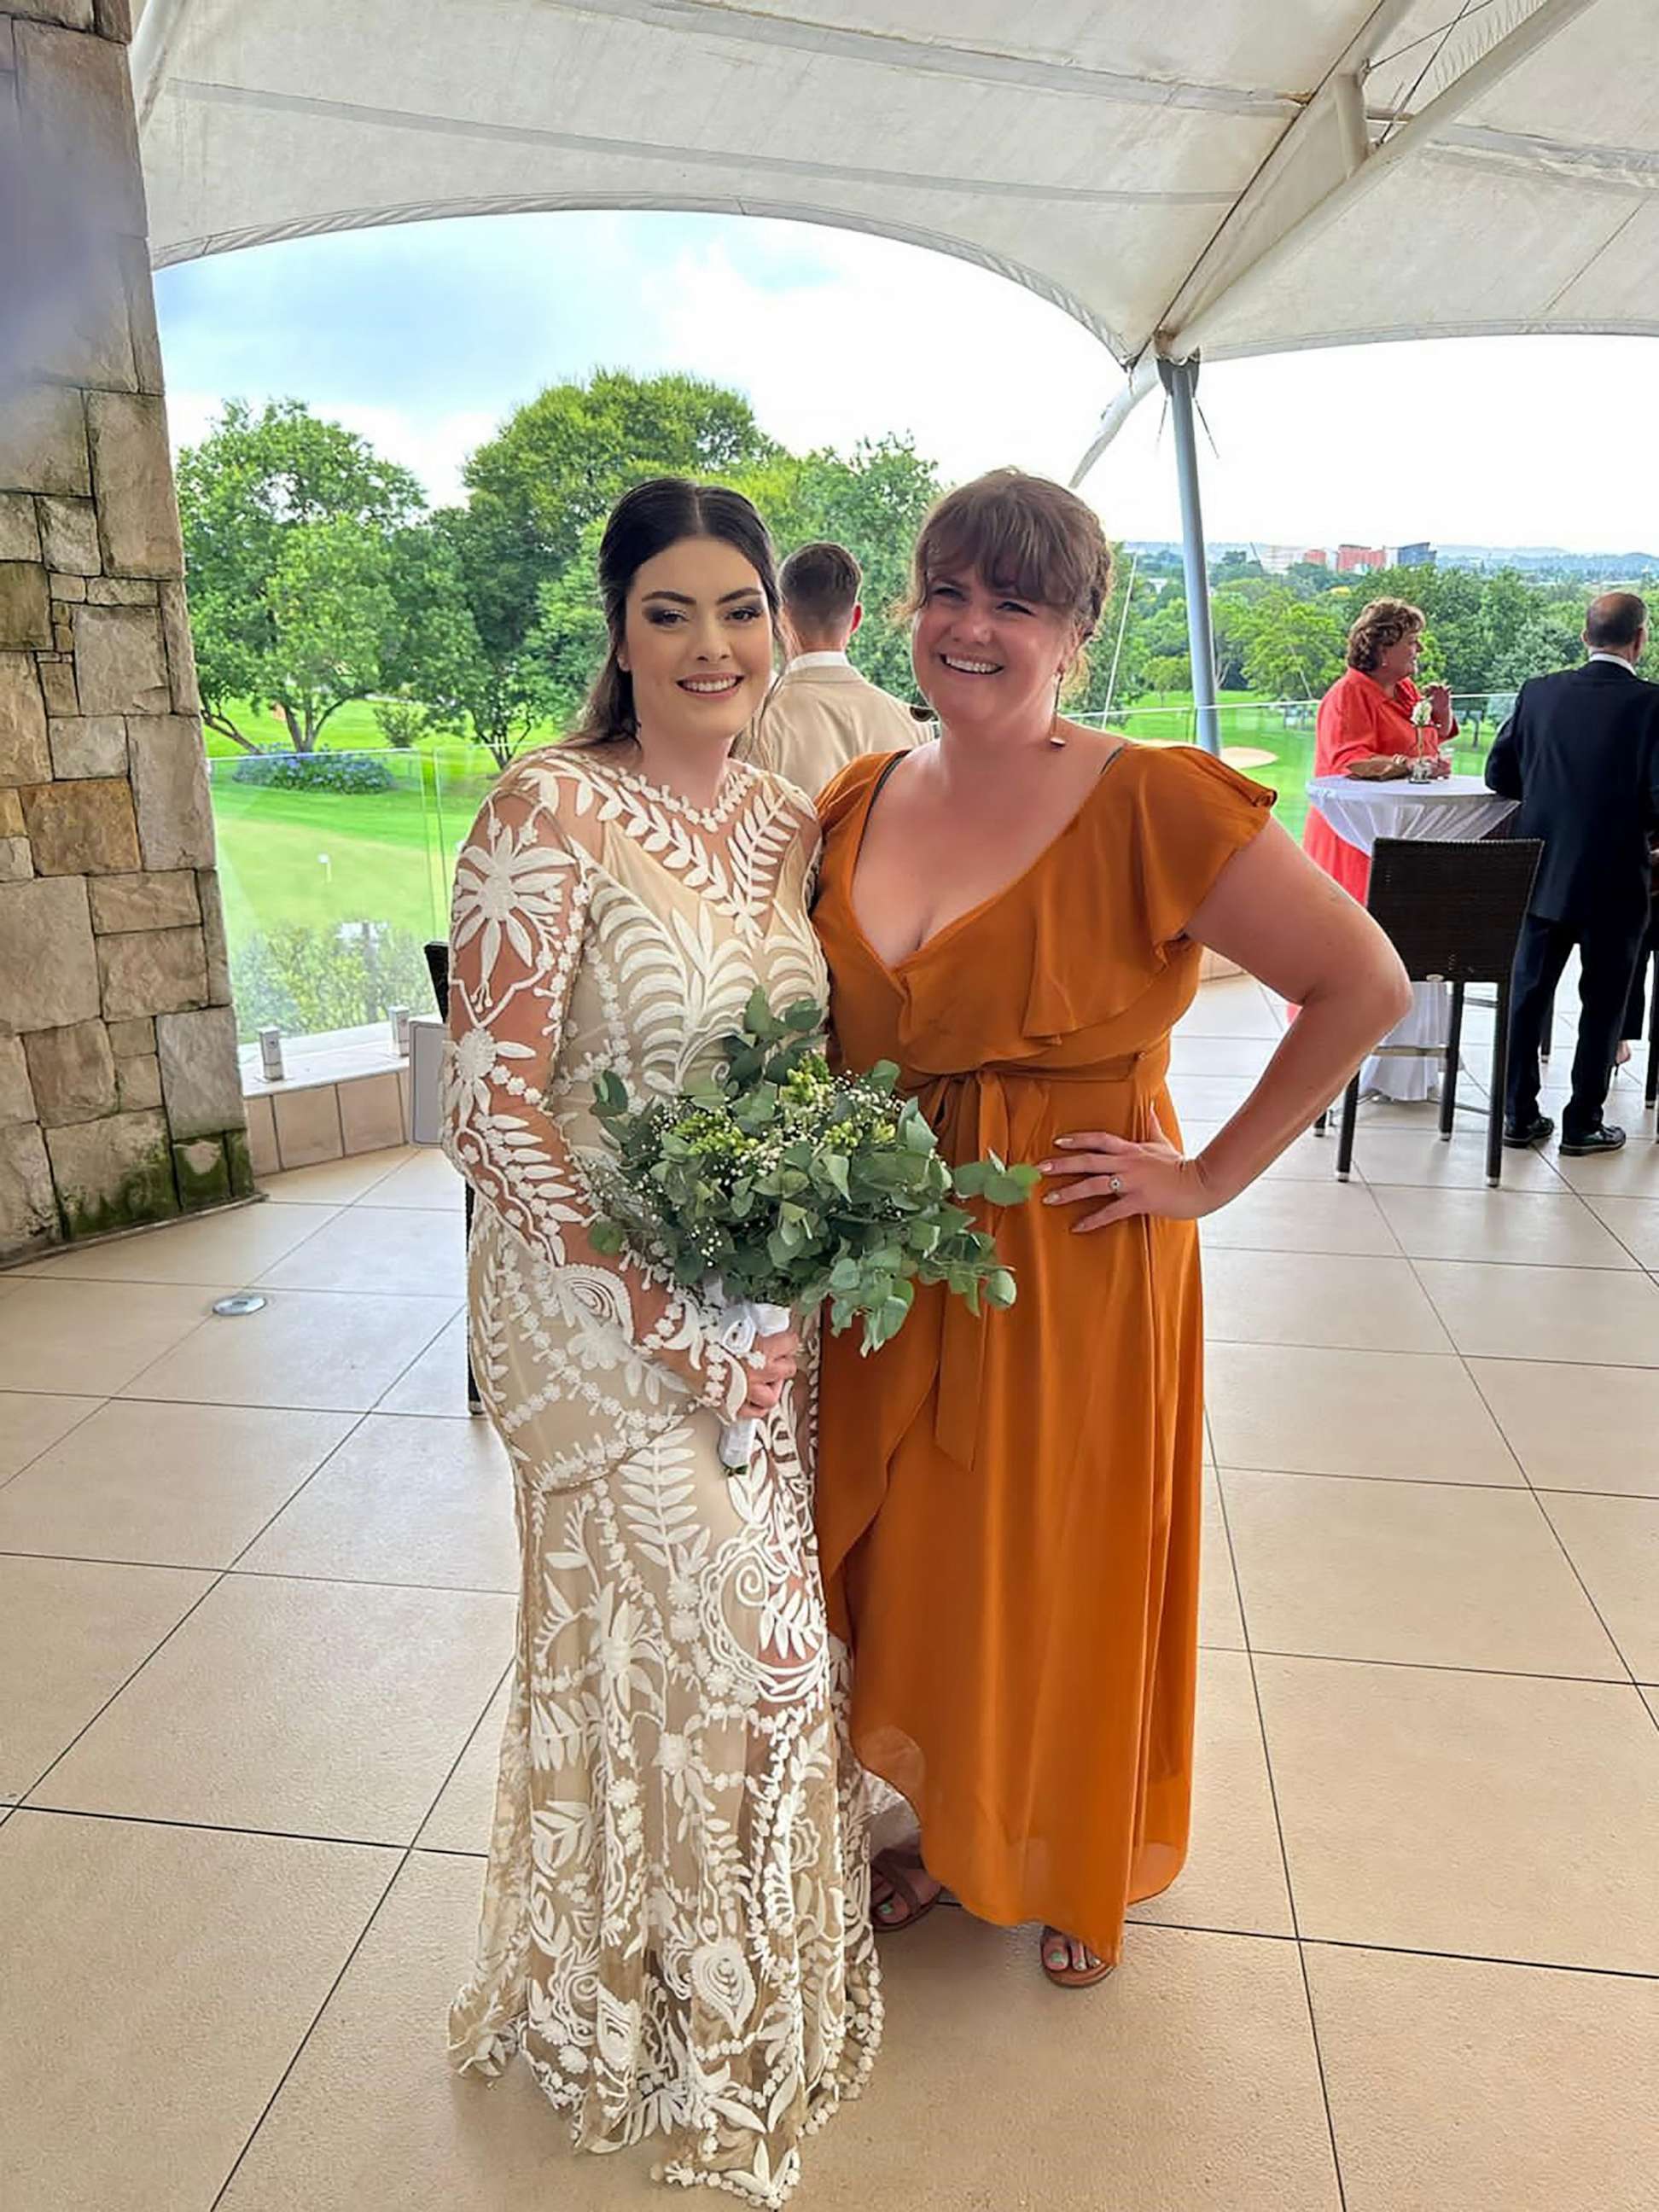 PHOTO: Simone Crouch and Emily Heath smile for a photo at Crouch's wedding in Johannesburg.